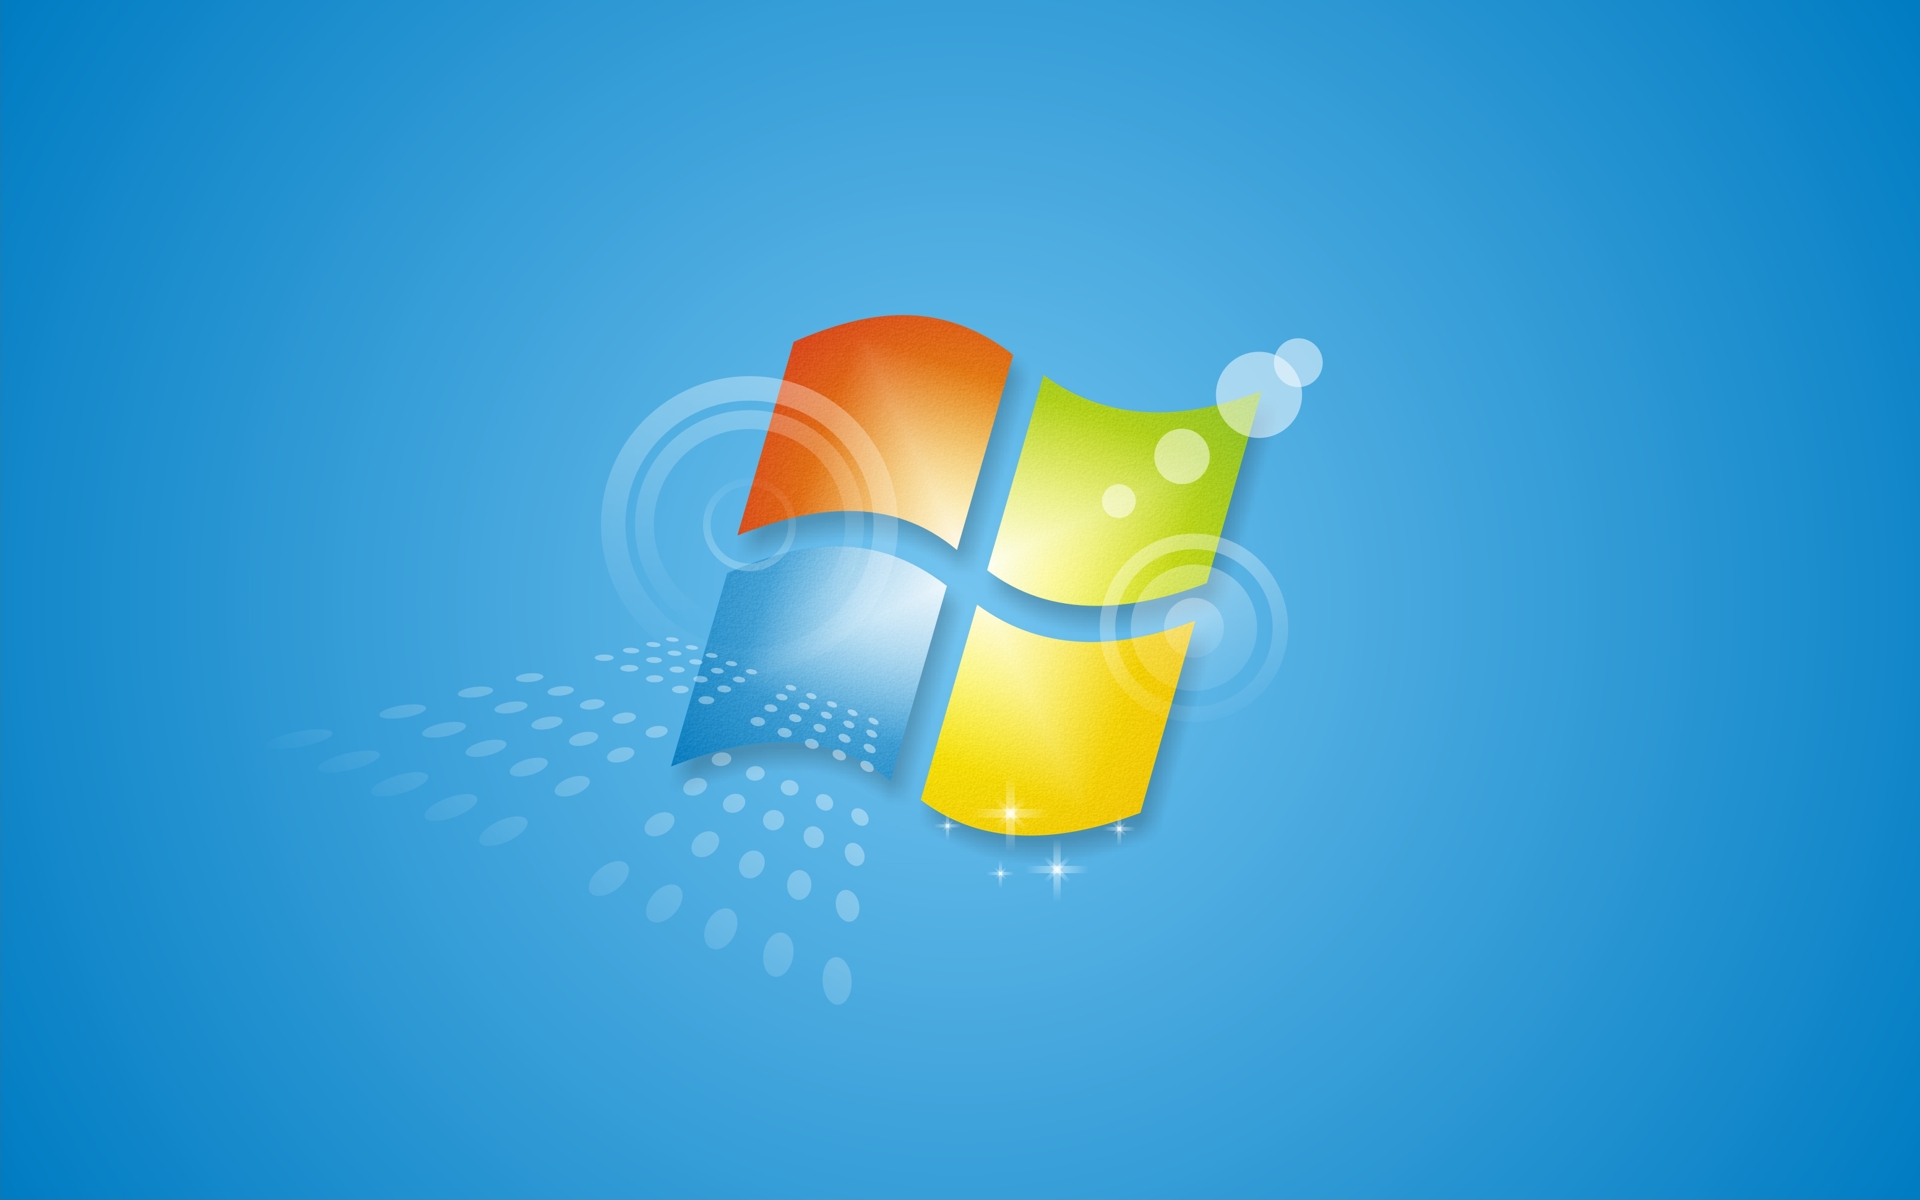 Microsoft makes it super easy to re-install Windows 7